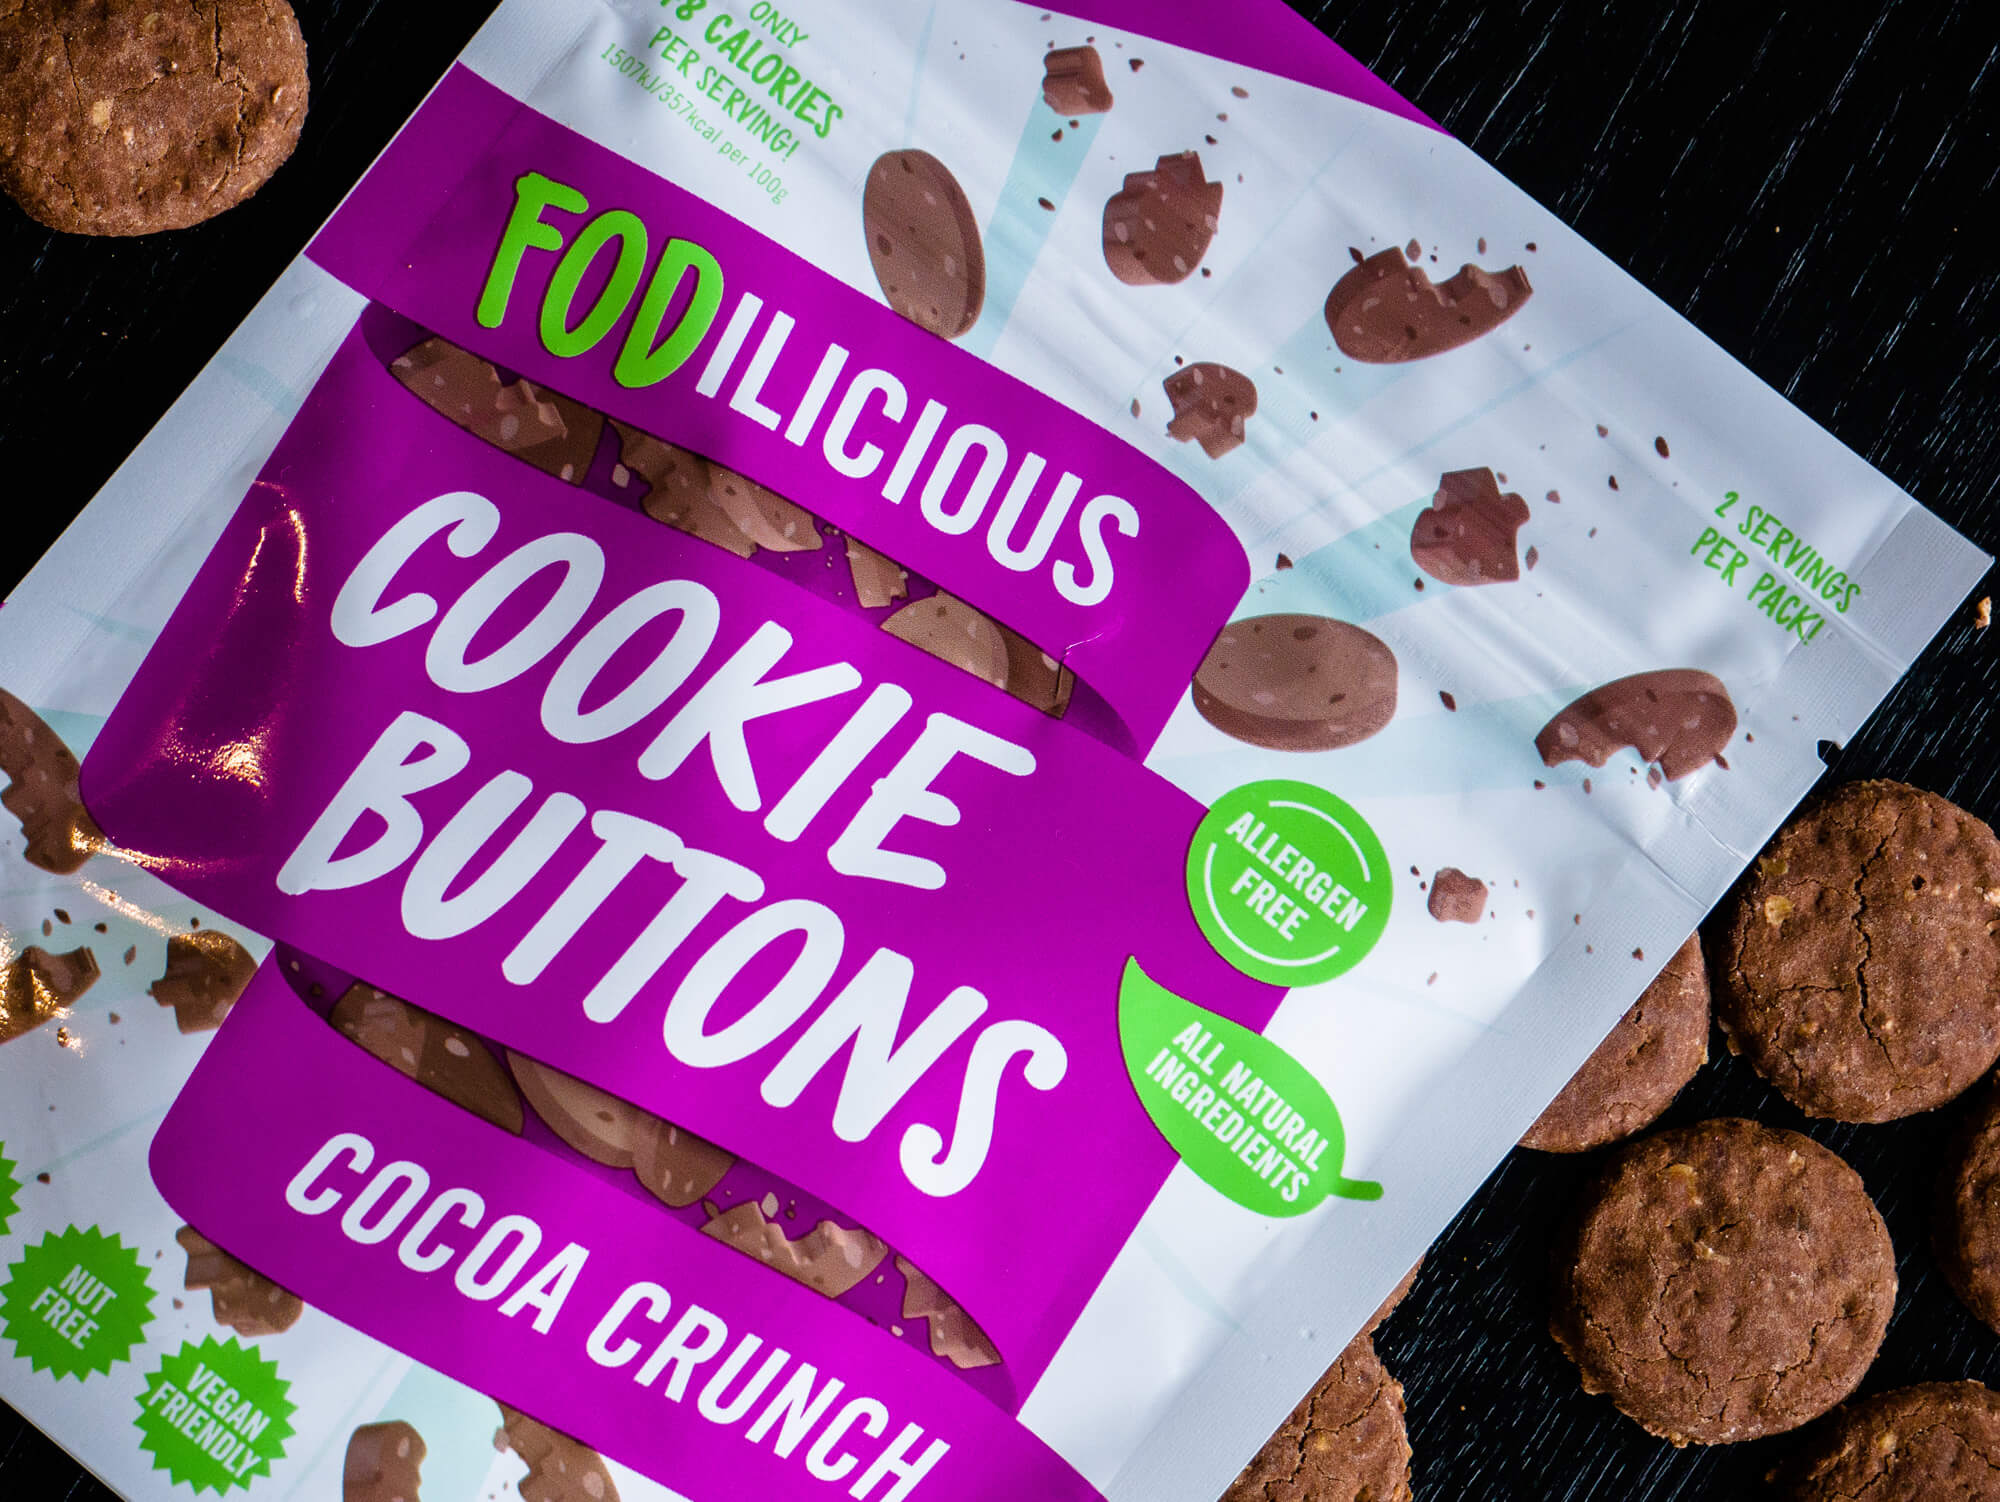 Fodilicious cookie buttons packet